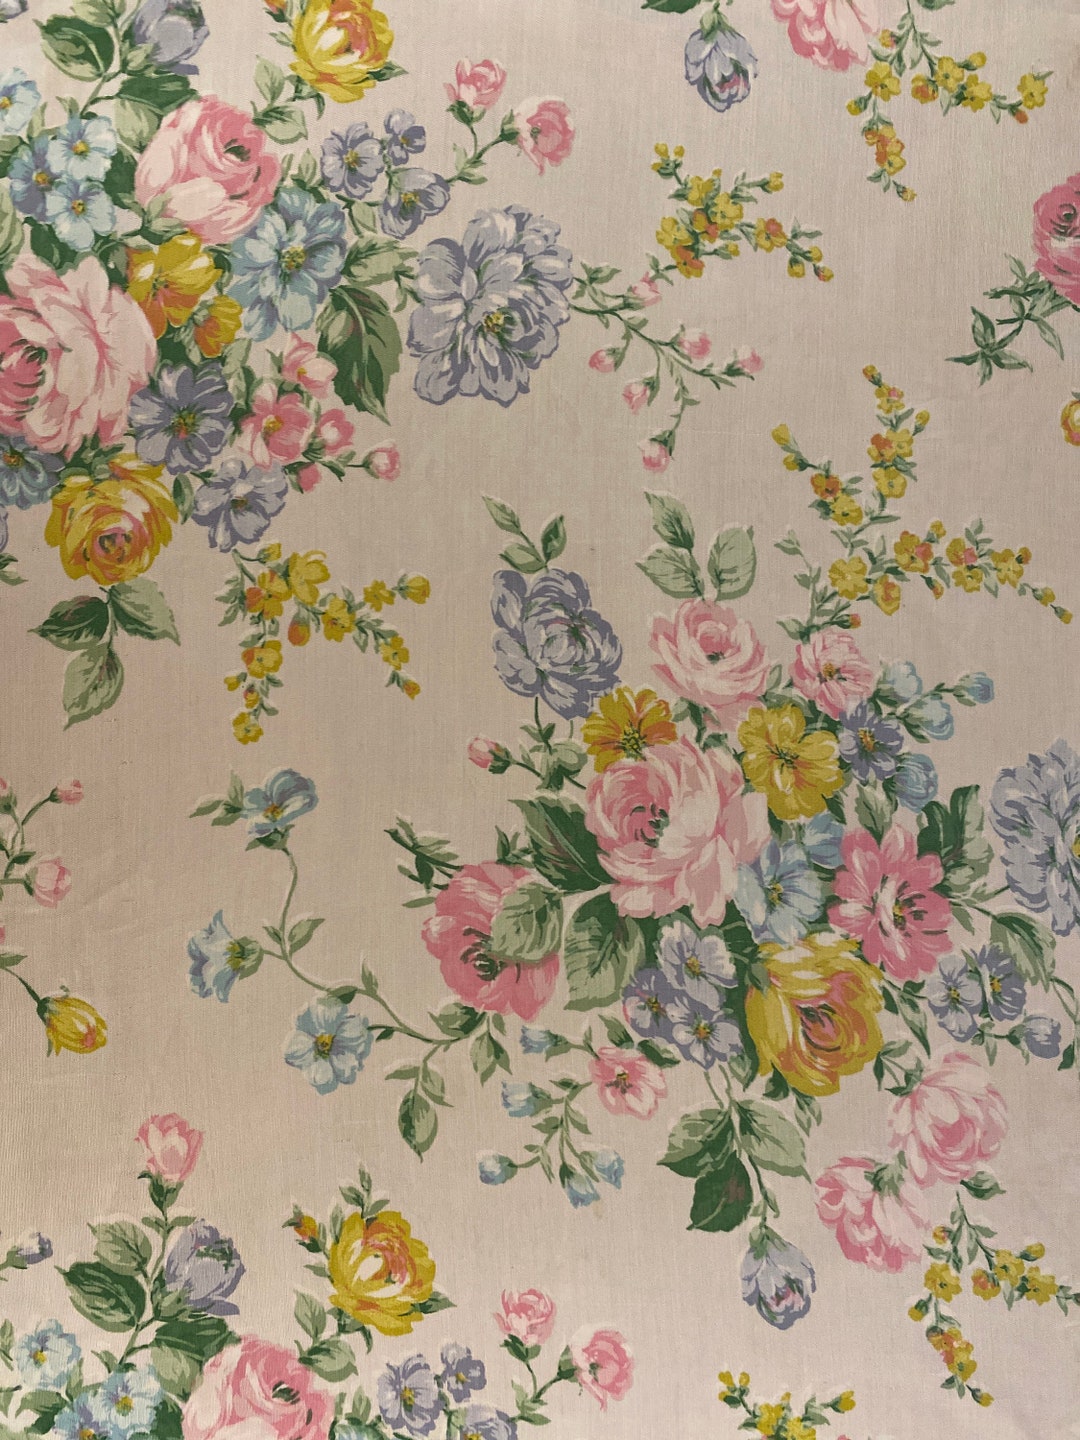 Vintage Cabbage Rose Fabric Remnant 23 X 27 - Etsy